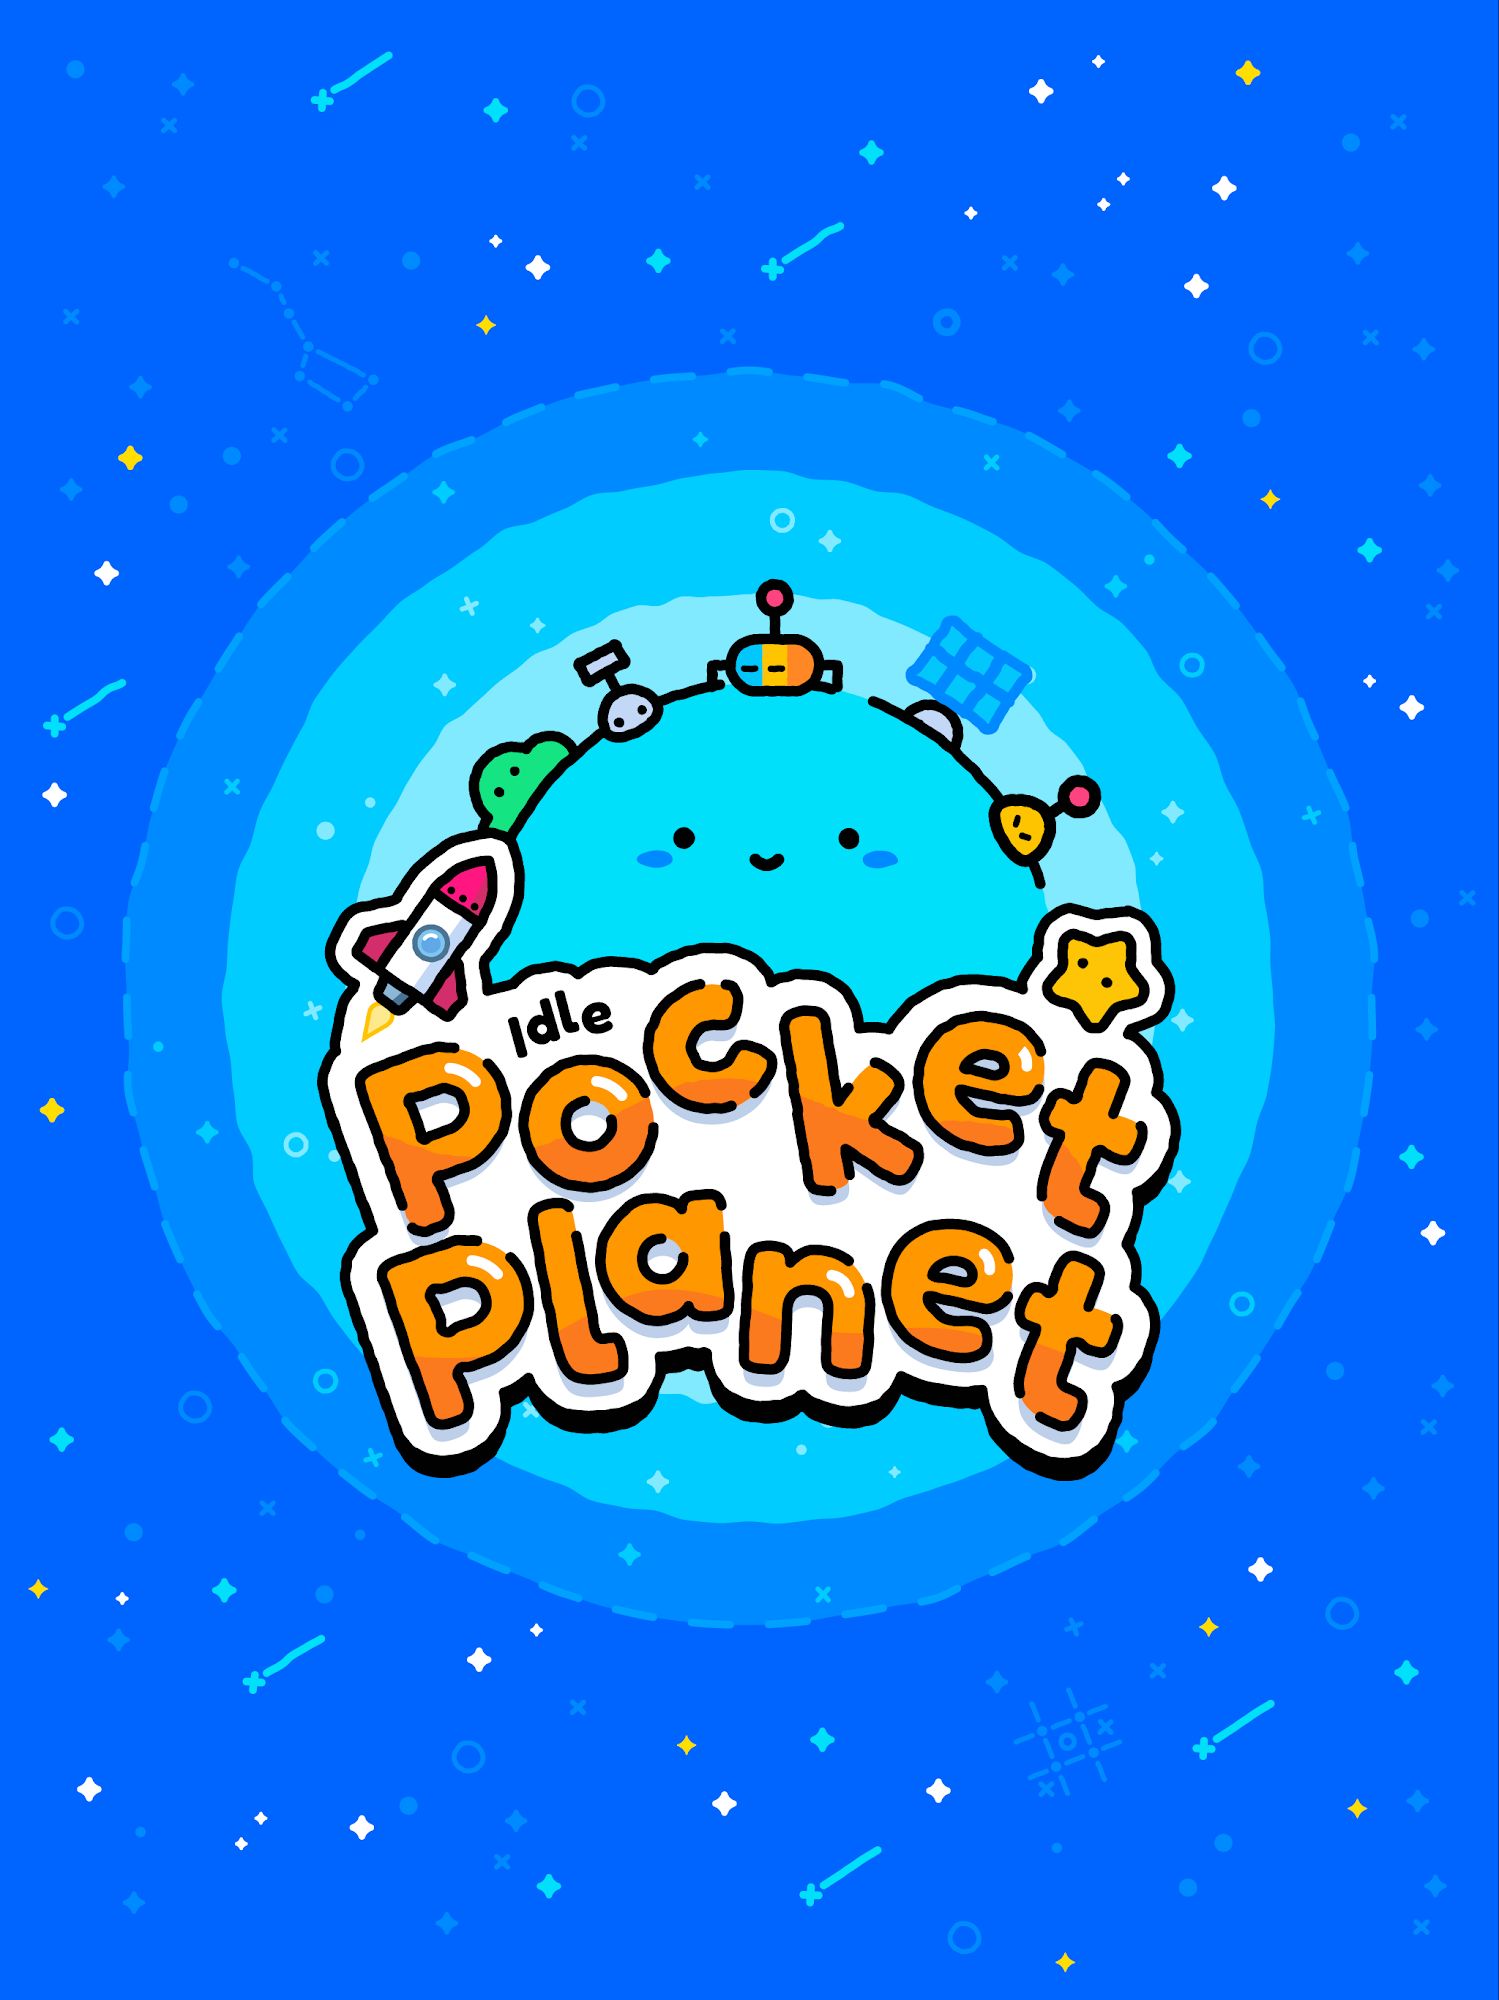 Full version of Android Space game apk Idle Pocket Planet for tablet and phone.